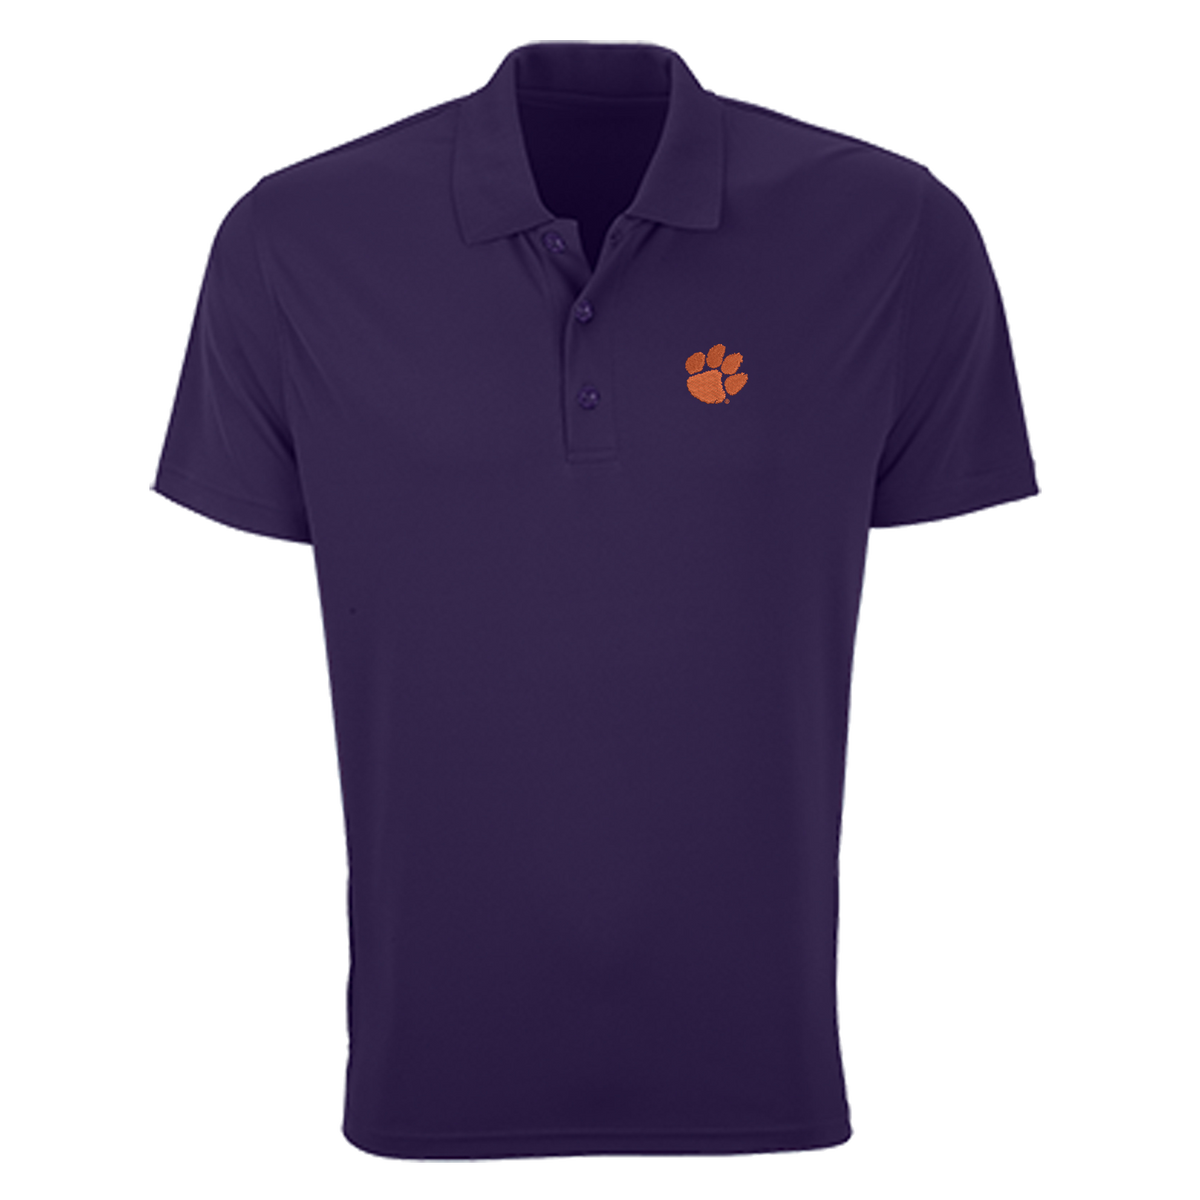 Clemson Vansport Omega Solid Mesh Tech Polo with Paw